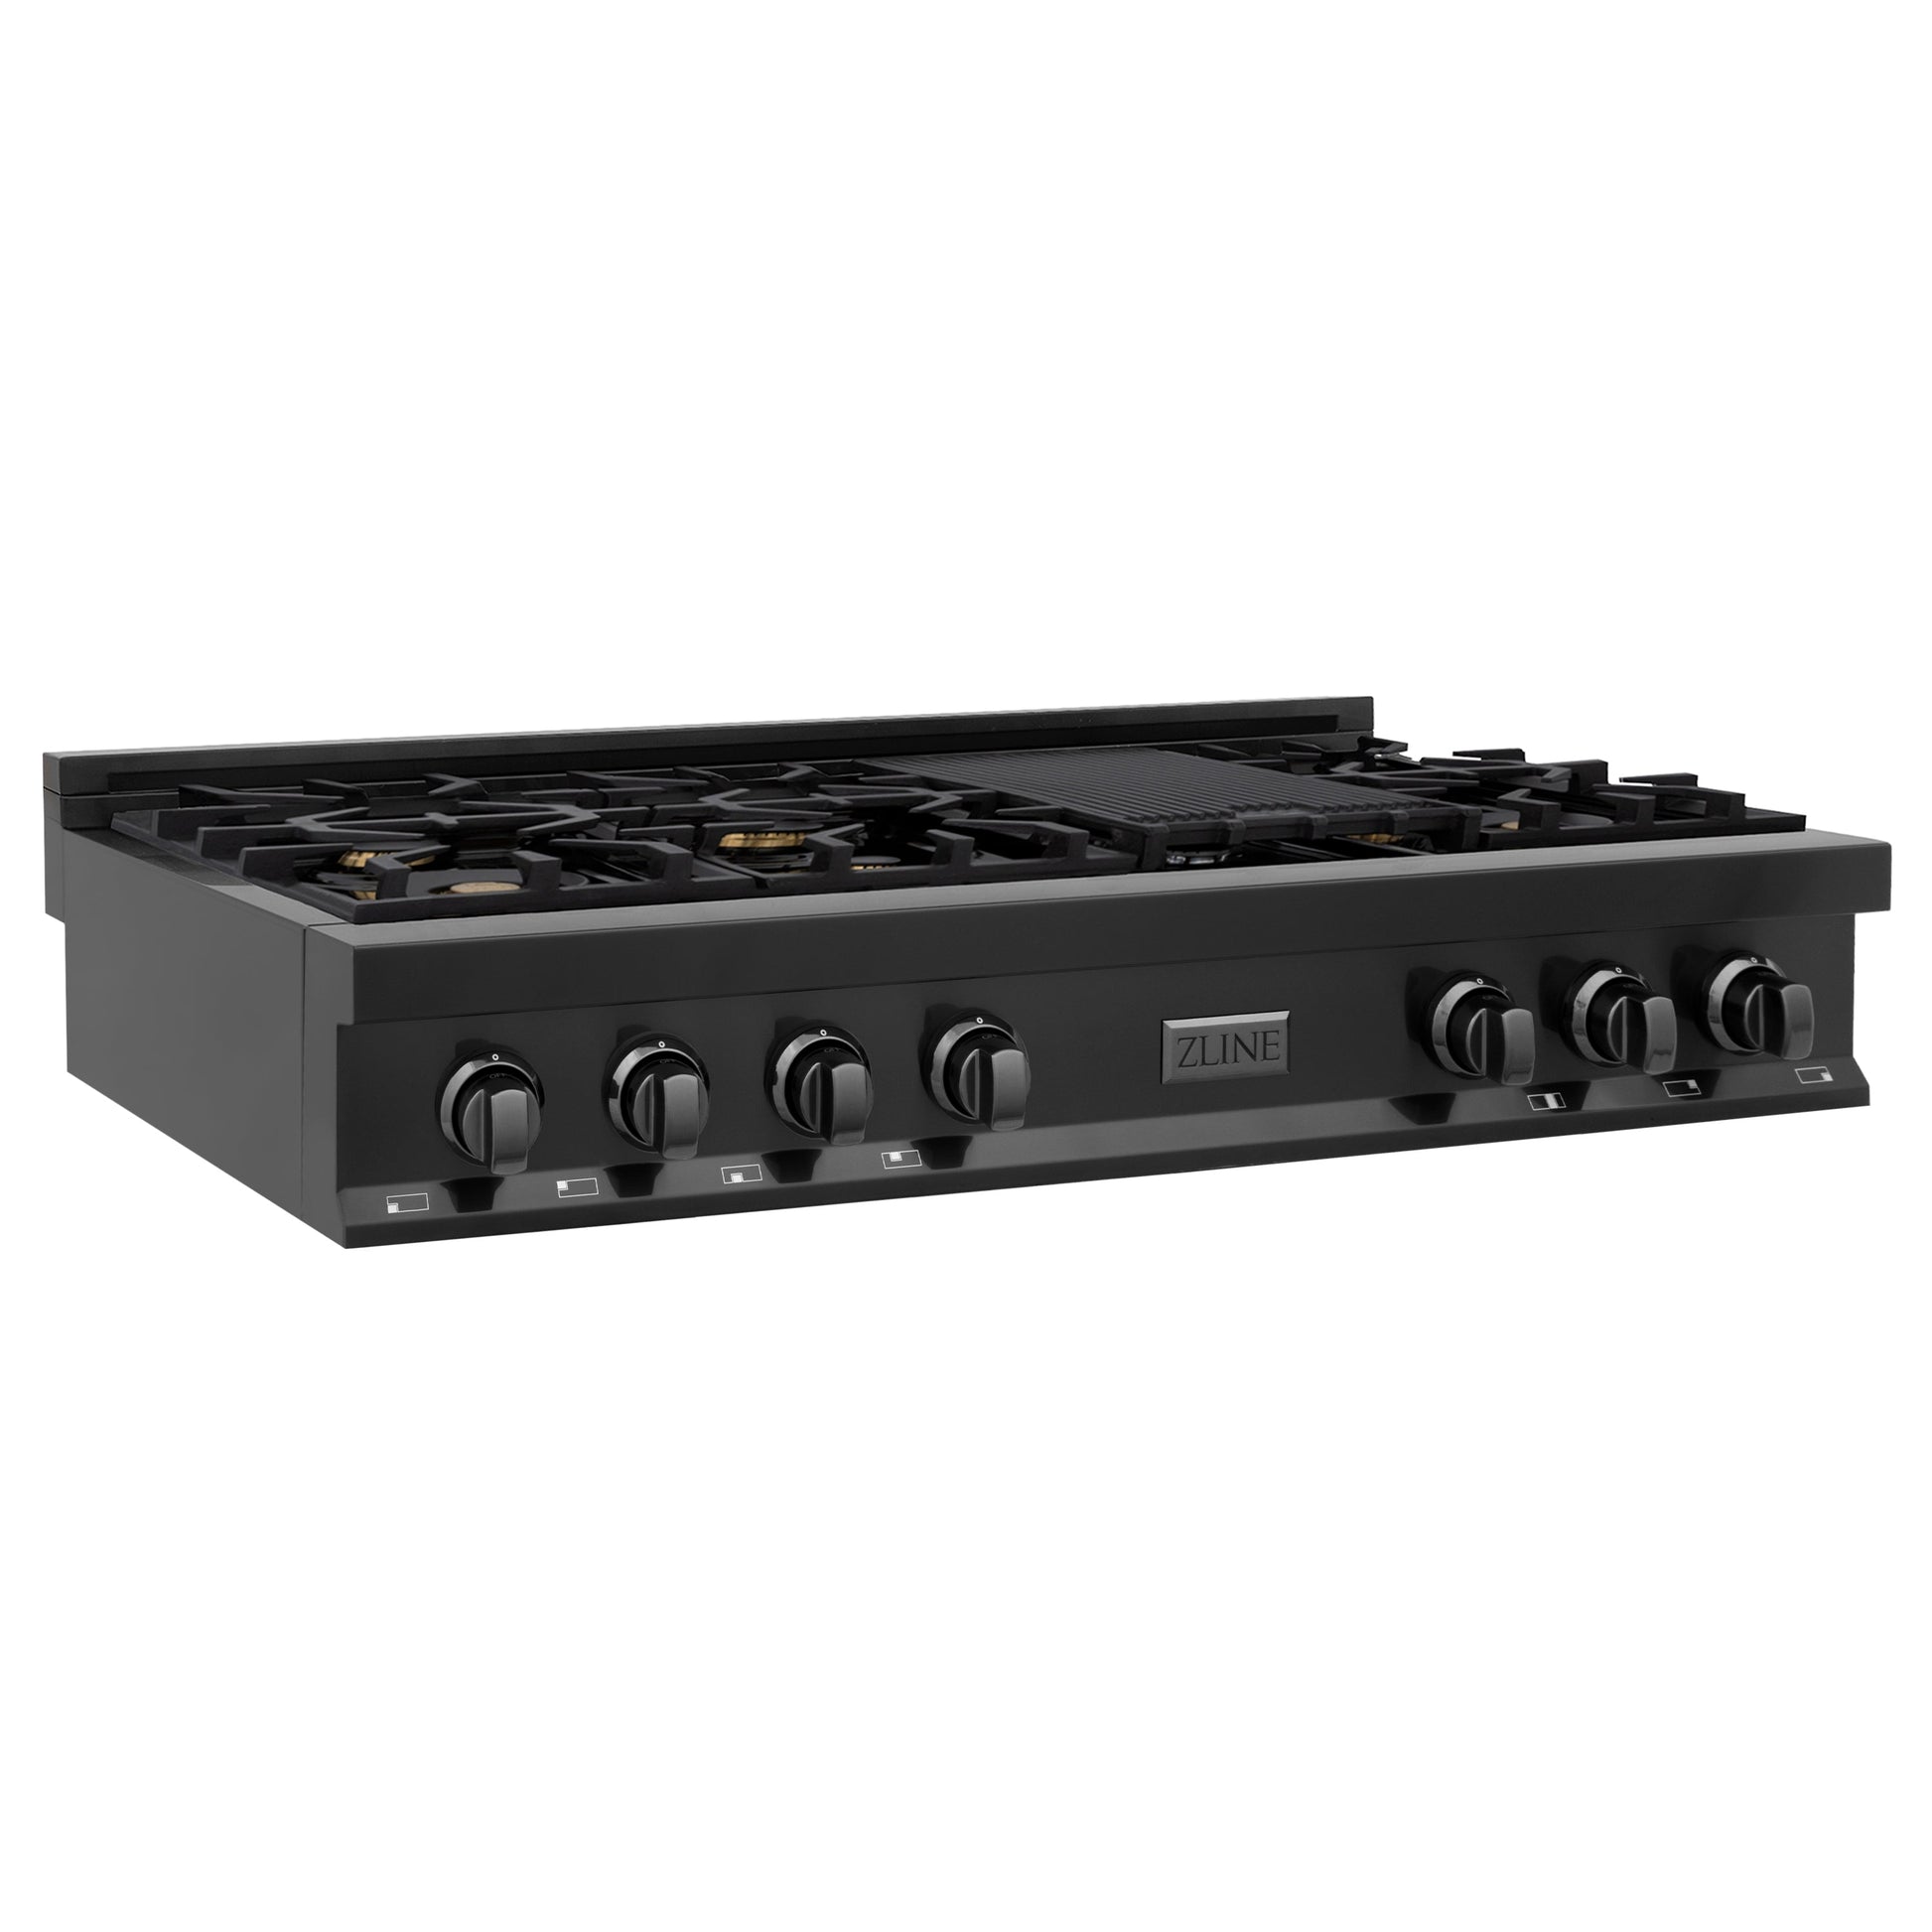 ZLINE 48 in. Porcelain Gas Stovetop in Black Stainless Steel with Brass Burners and Griddle.